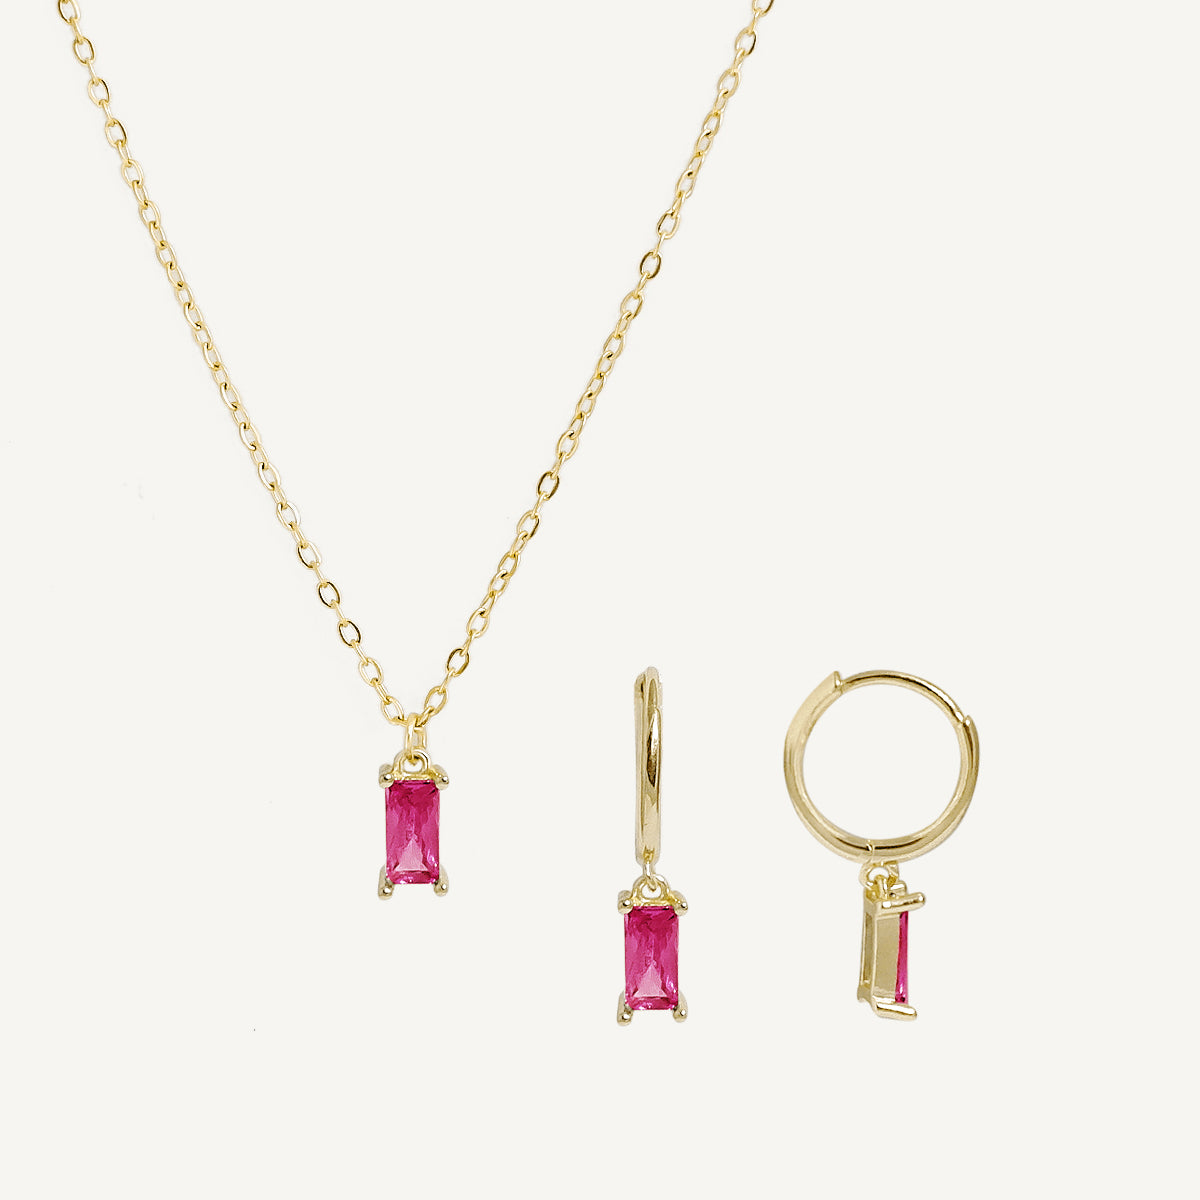 The Baguette Birthstone Hoops and Necklace Bundle